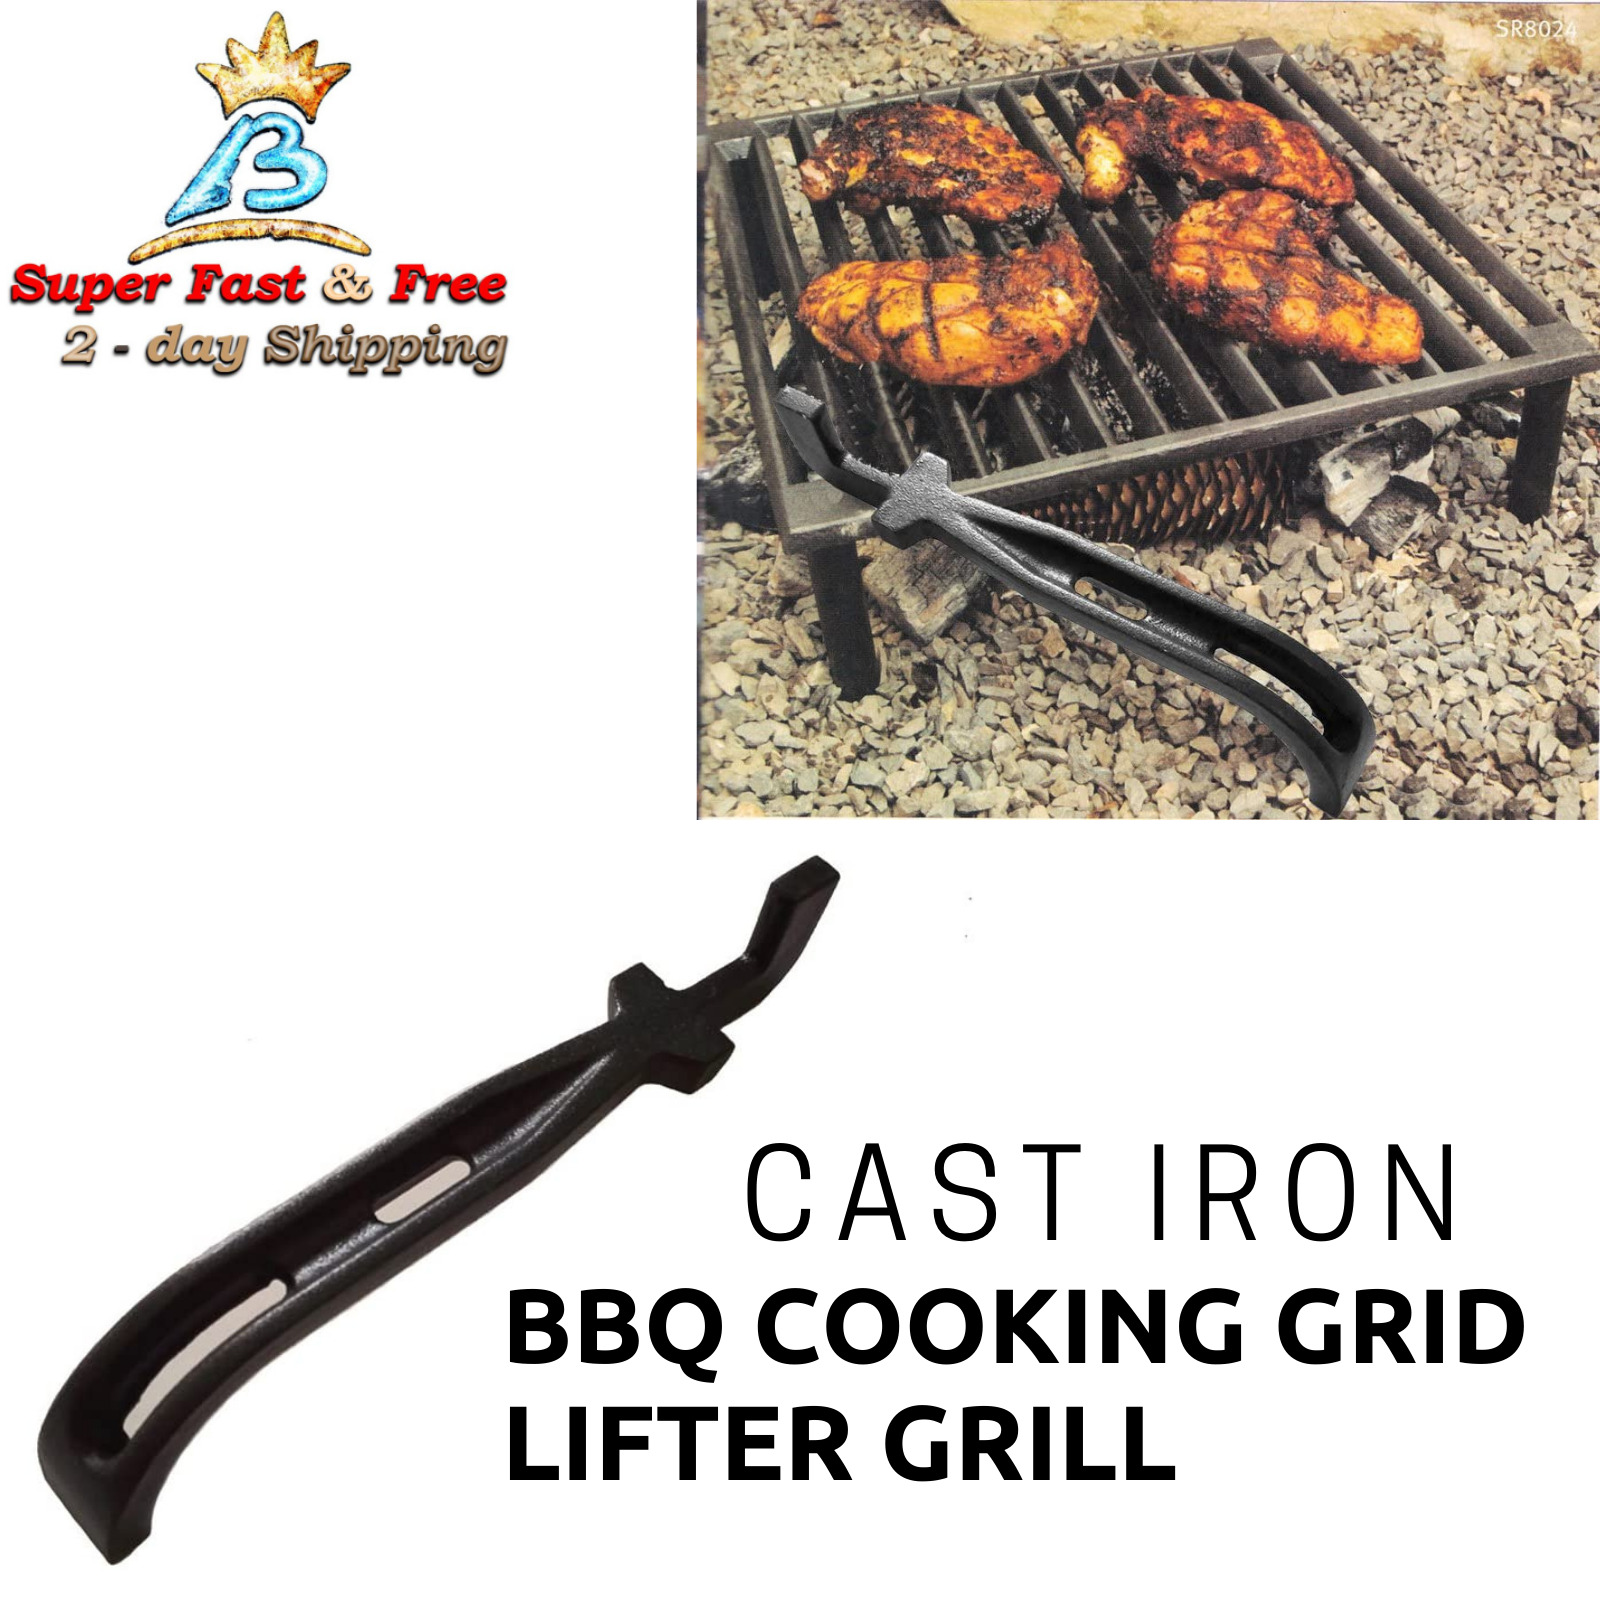 Cast Iron Barbecue Grill Grate Lifter BBQ Grill Accessories Big Green Egg Etc.